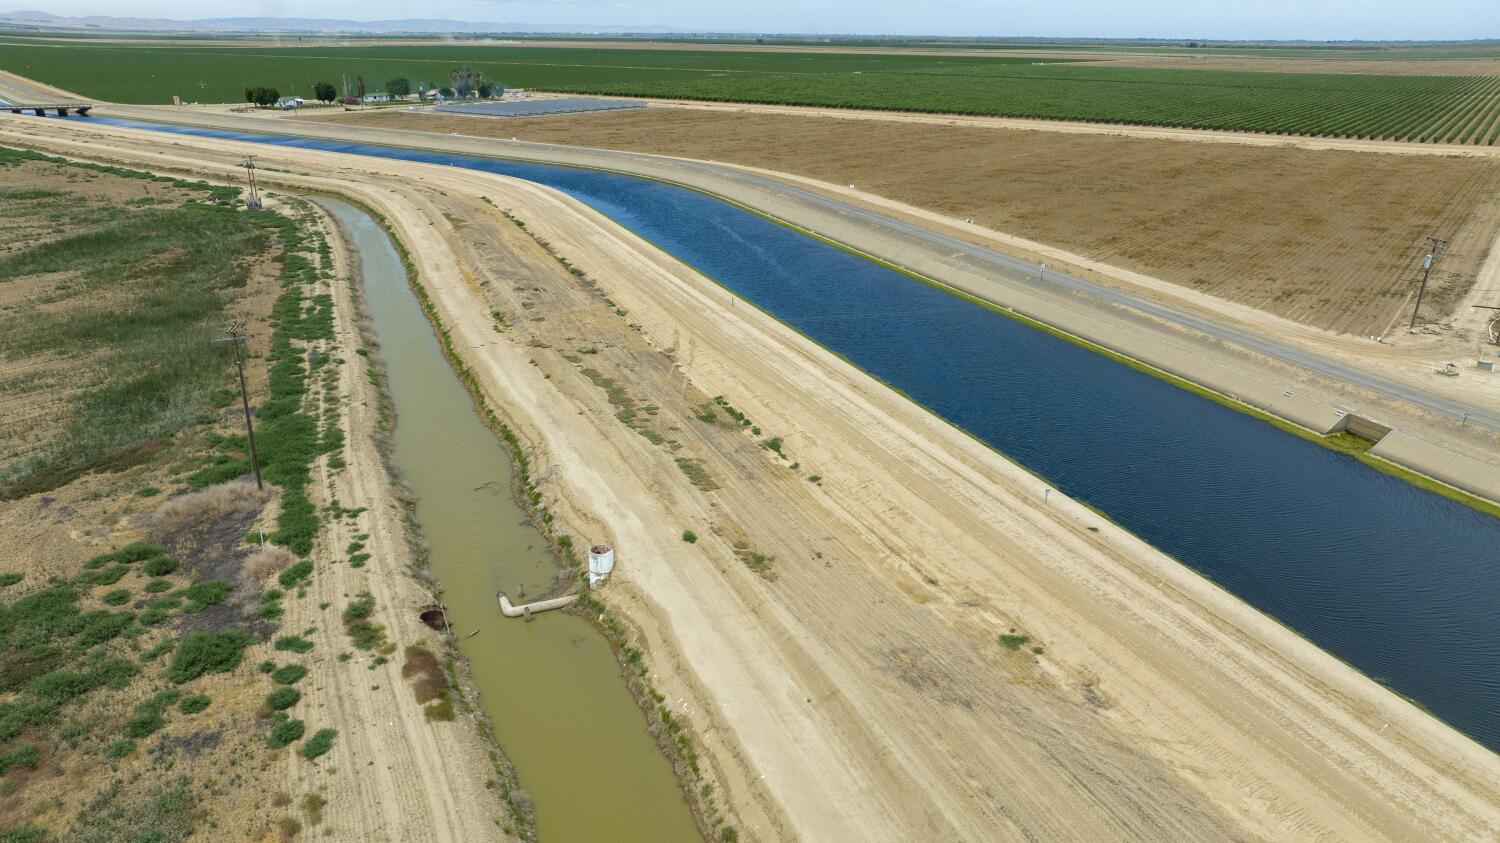 Two congressmen request review after Times report on Central Valley water heist 